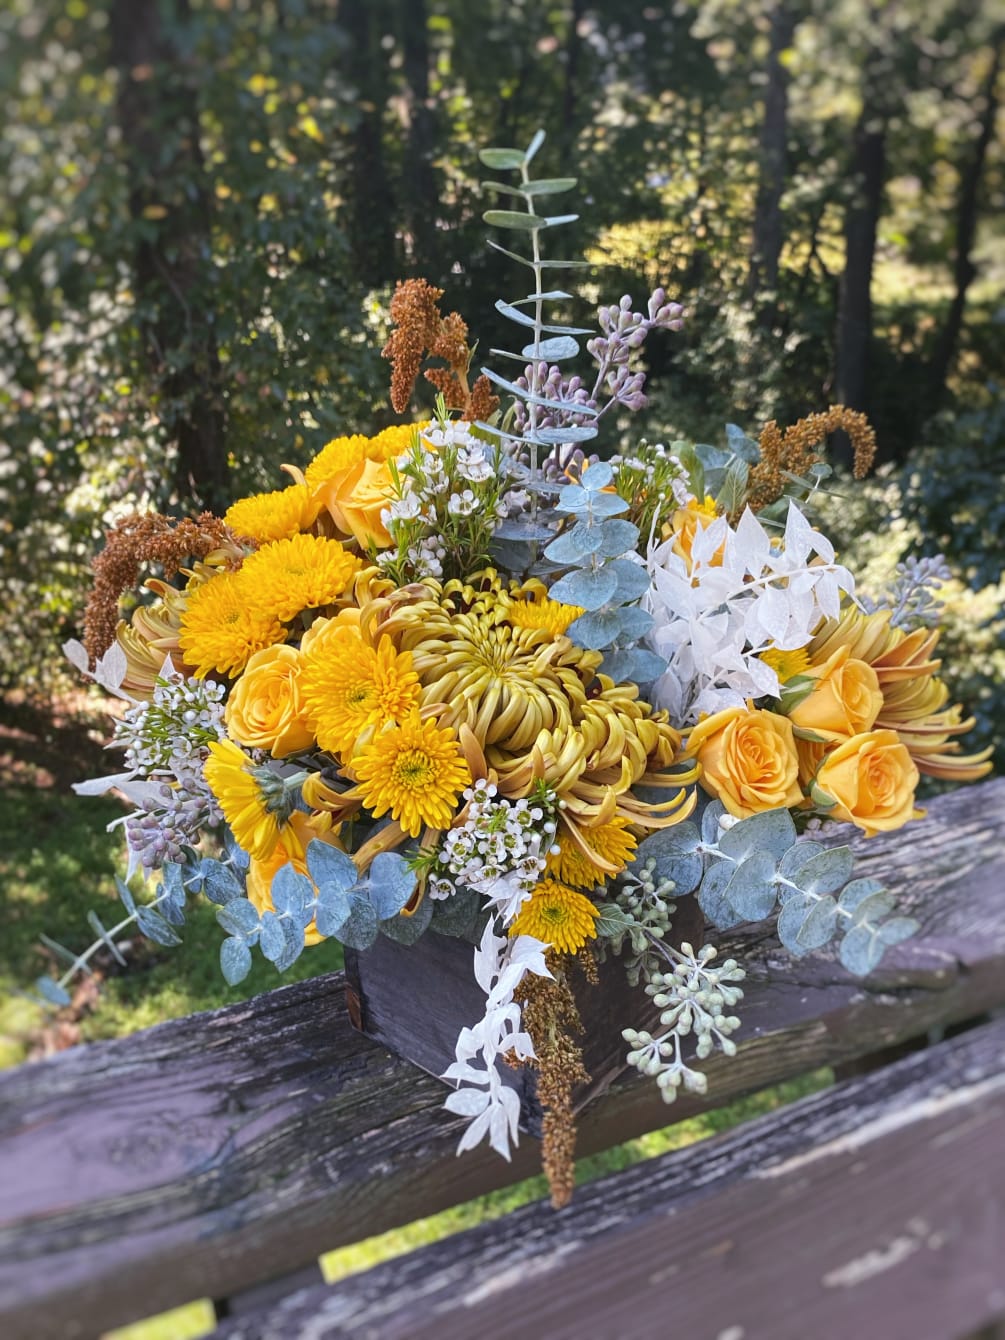 Tightly arranged flowers in a wooden box. Color palette varies throughout the